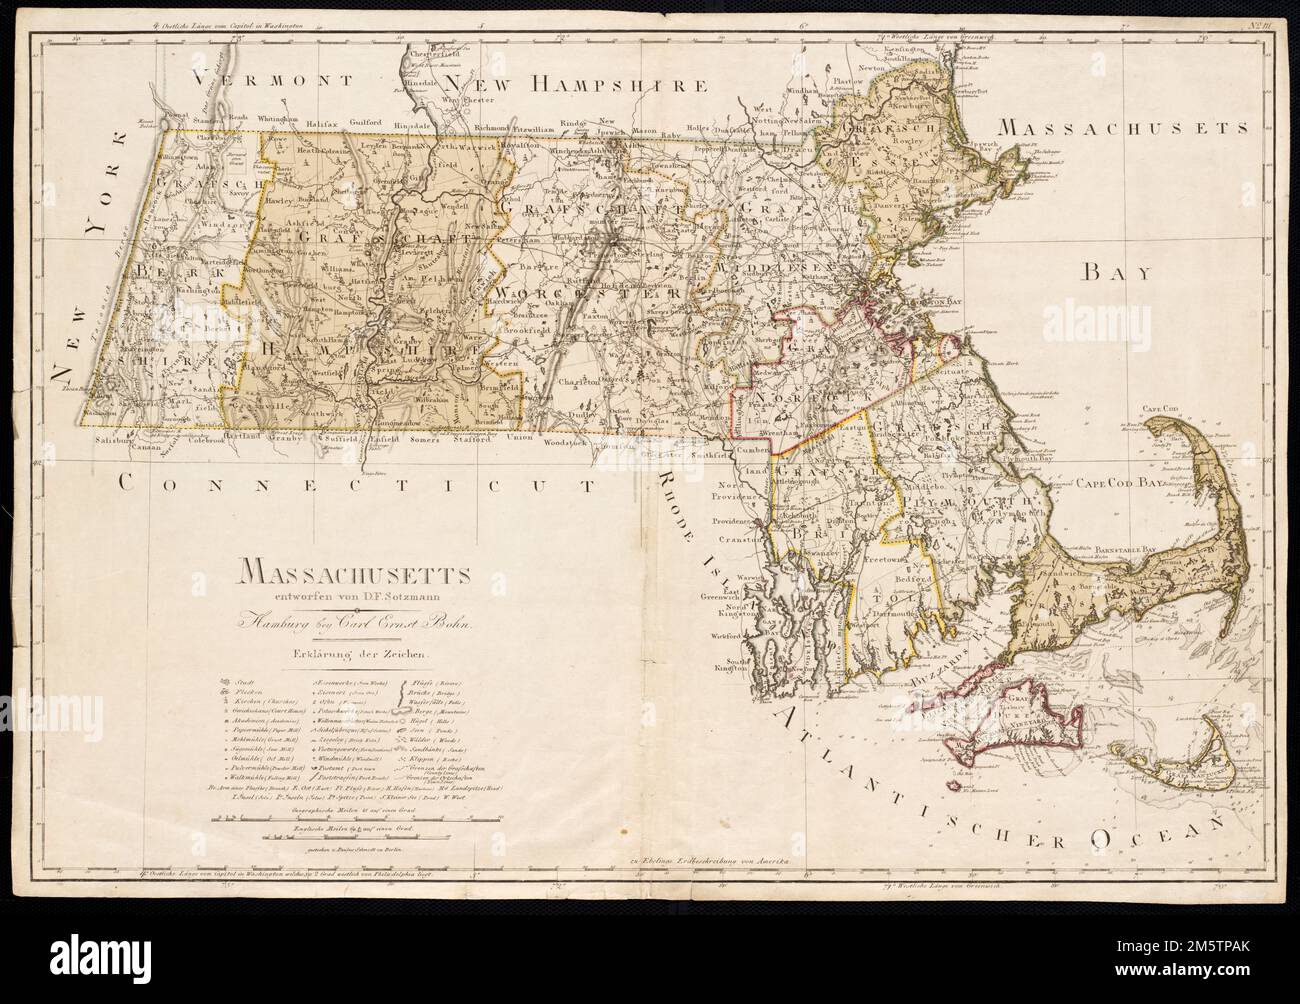 Massachusetts. Relief shown by hachures. Depths shown by soundings. Also shows county boundaries. Place names in German and English. "Zu Ebelings Erdbeschreibung von Amerika." Prime meridians: Greenwich and Washington. Atlas plate: No. III... Erdbeschreibung von Amerika. Erdbeschreibung von Amerika, Massachusetts Stock Photo